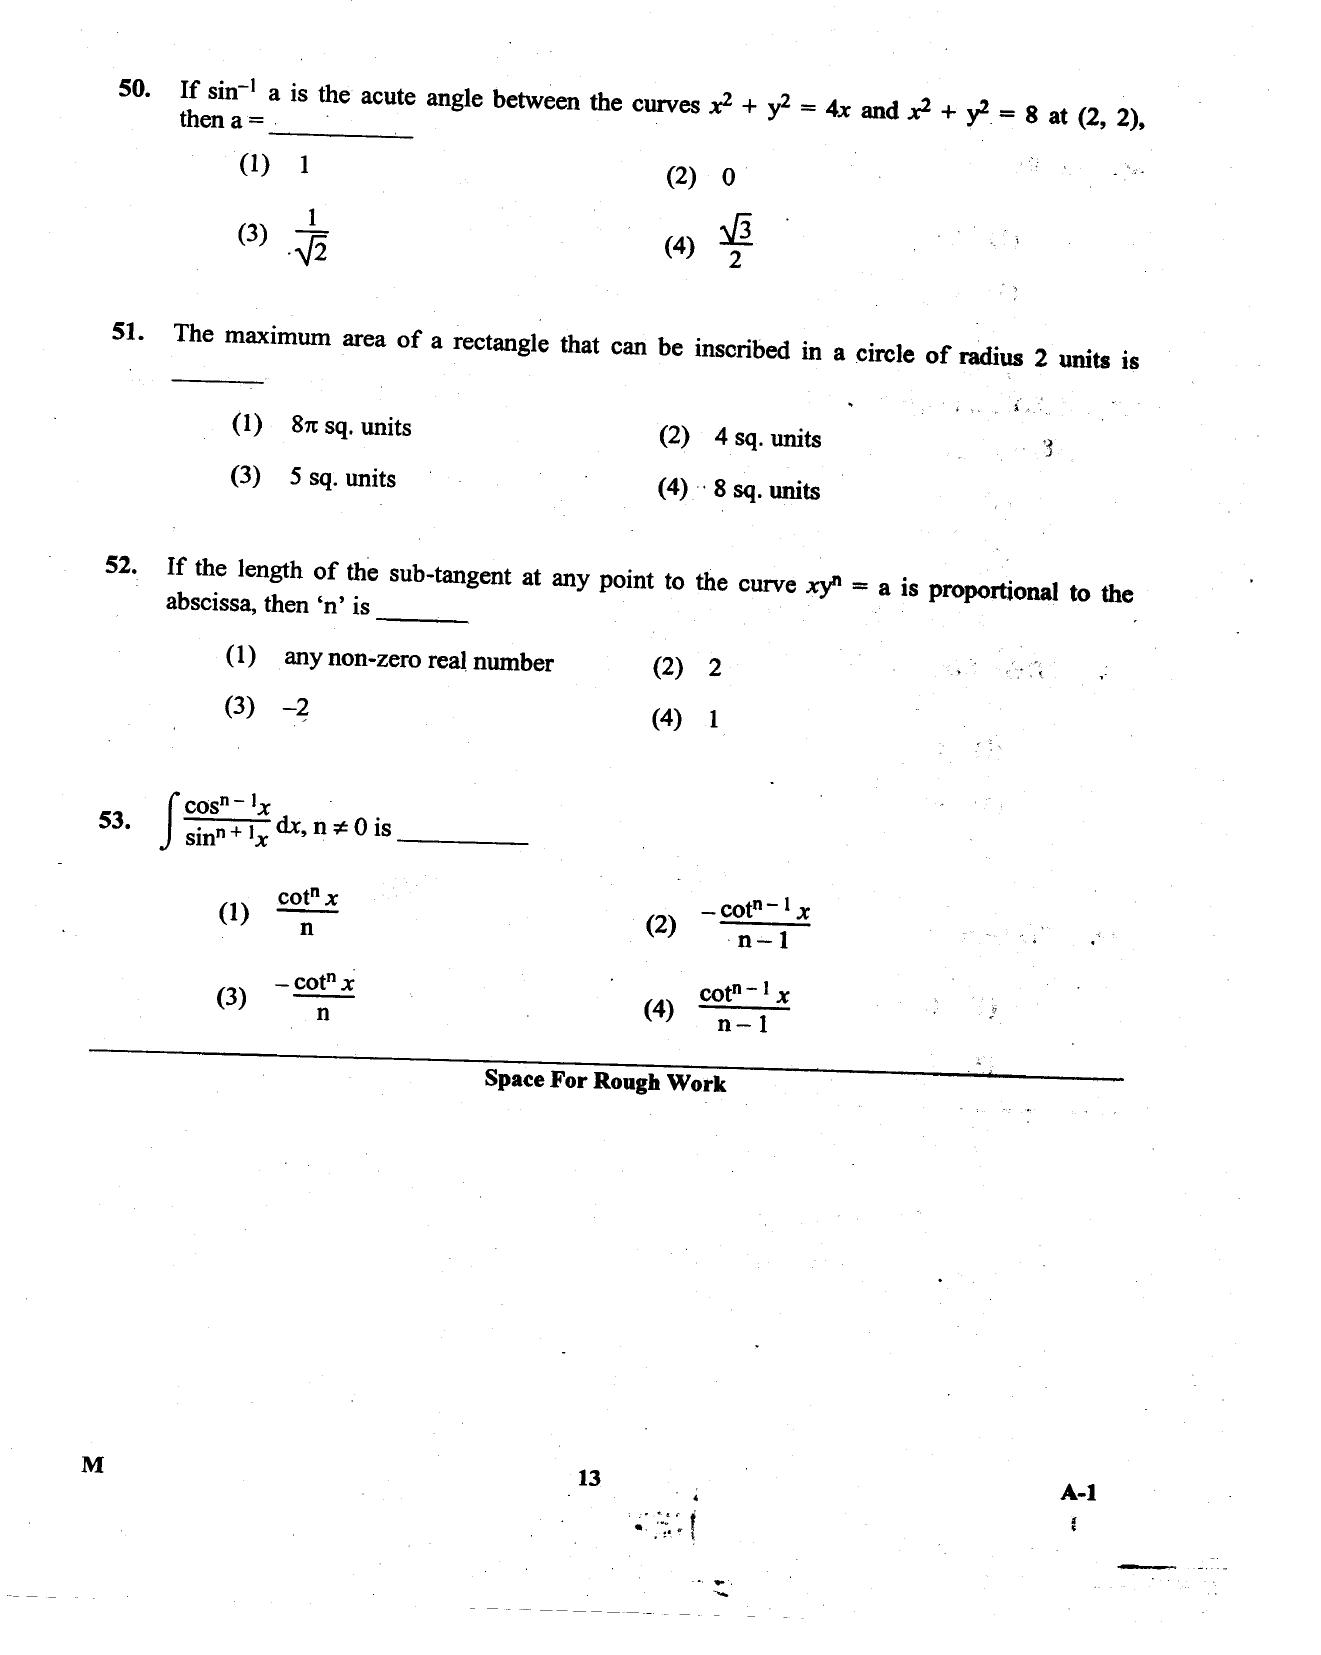 KCET Mathematics 2013 Question Papers - Page 13